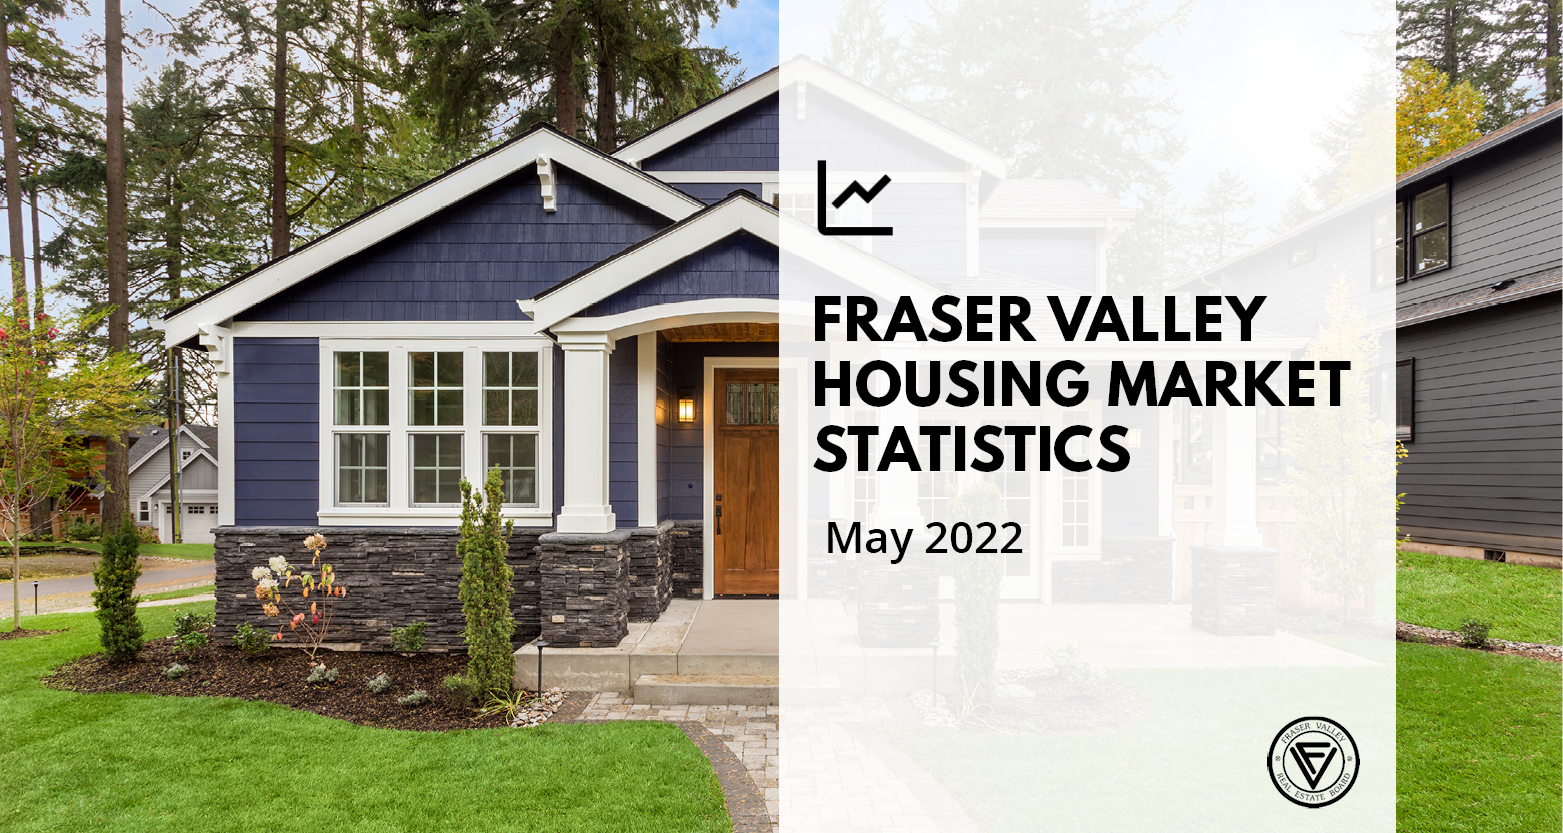 Home prices soften as Fraser Valley housing market cools amid lower sales and higher inventory